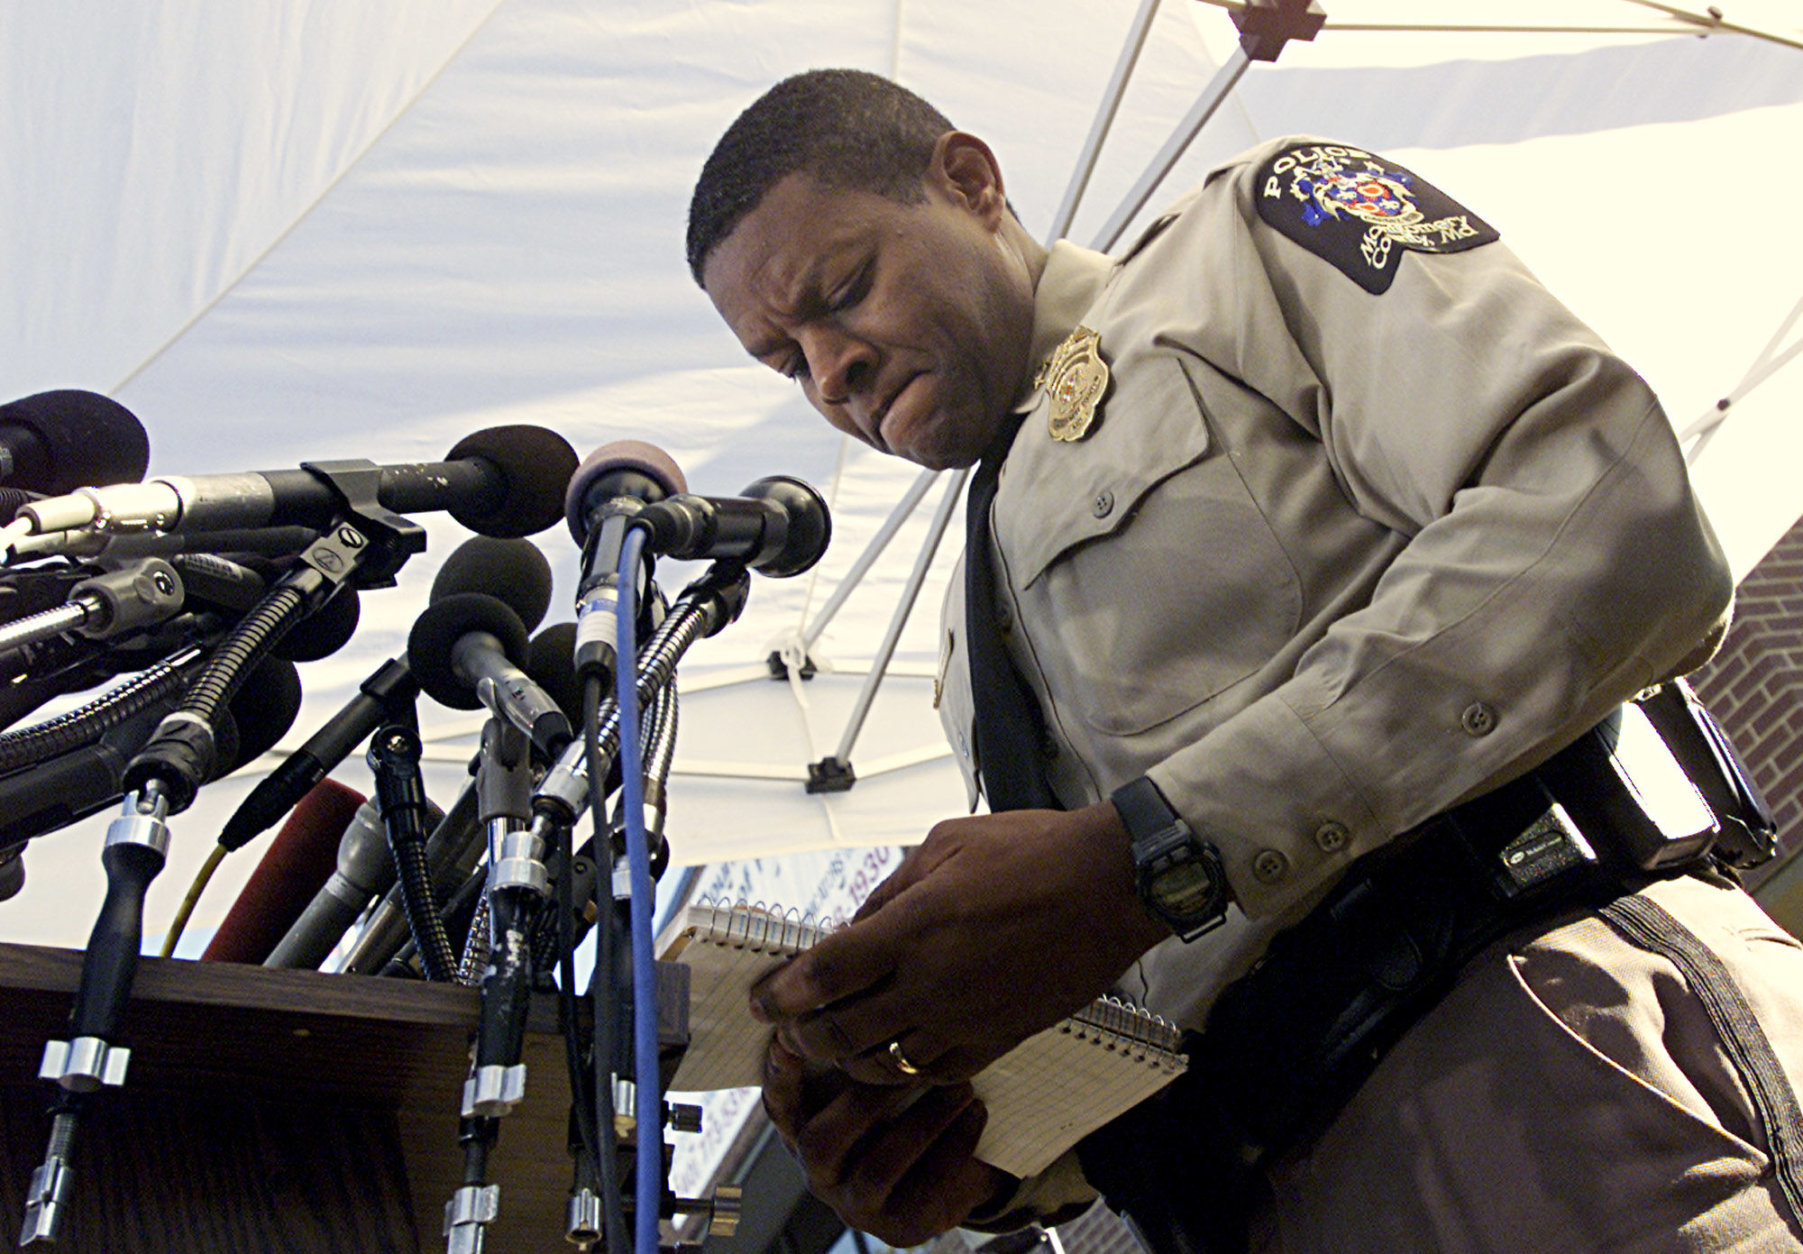 Montgomery County Police Chief Charles A. Moose reads from a notebook as he delivers another message to an unspecified individual during an evening news conference Monday, Oct. 21, 2002 in Rockville, Md.  (AP Photo/Victoria Arocho)